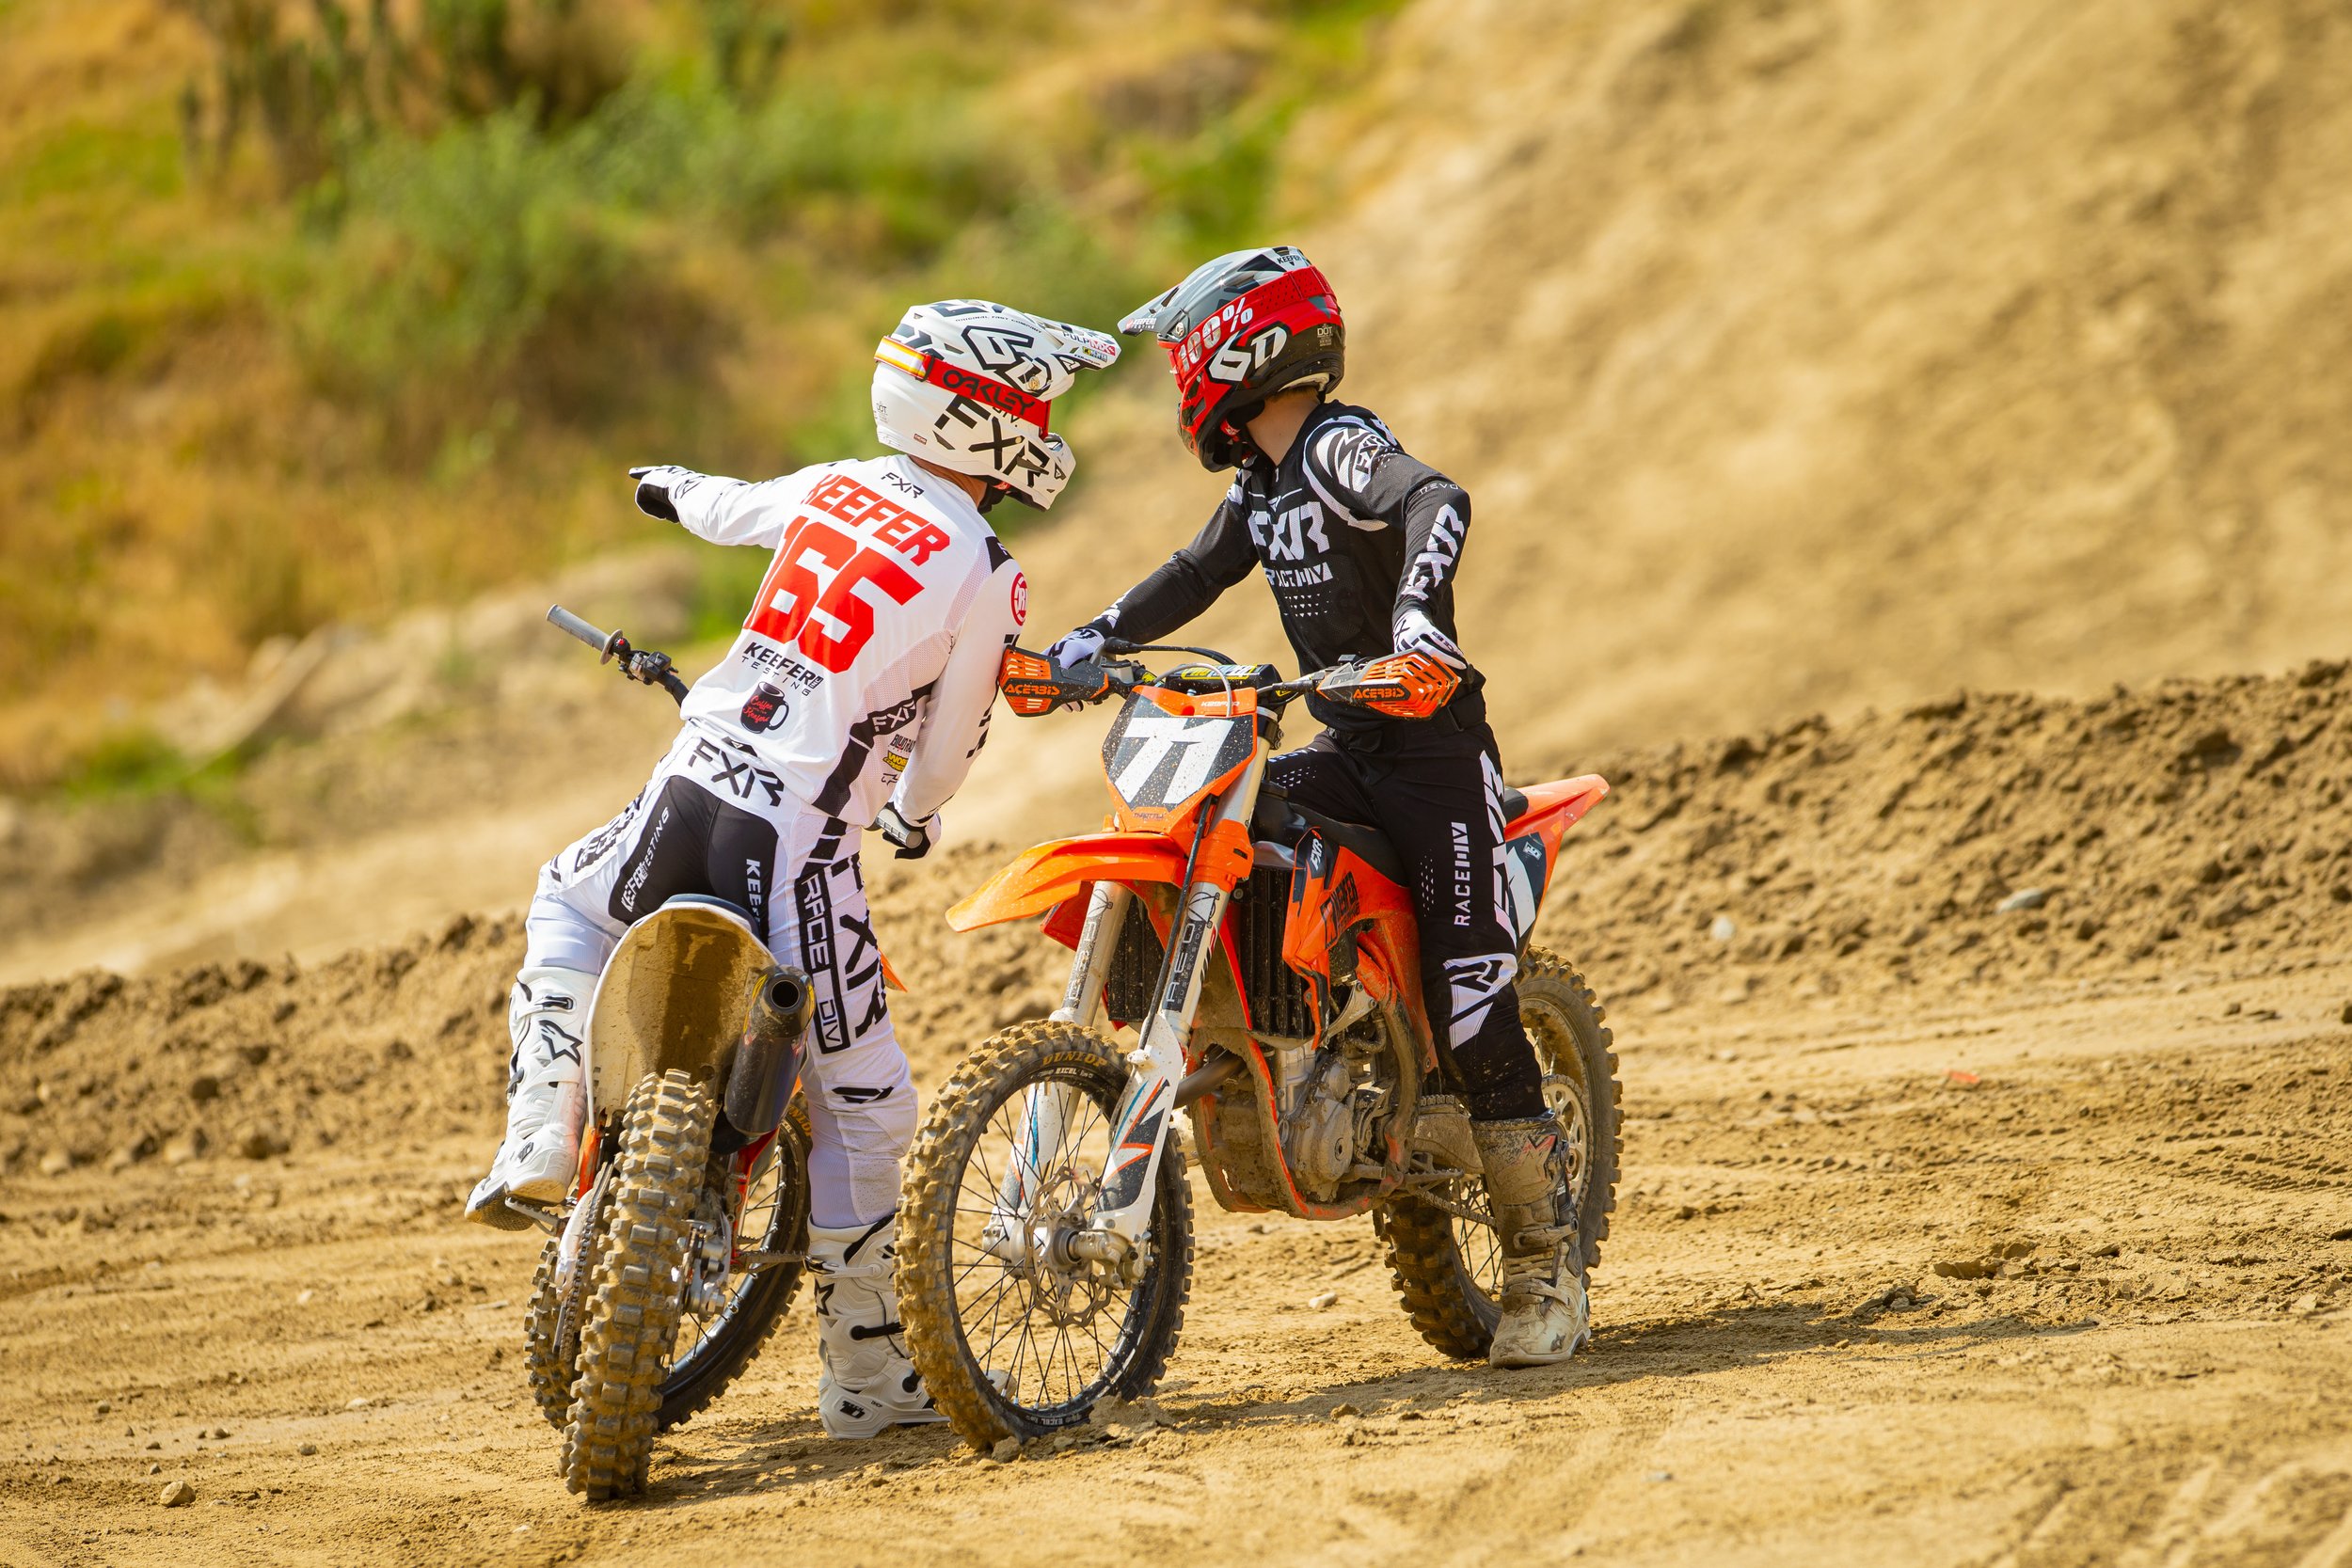  The RMATVMC Keefer Tested Podcast Presented By FXR Racing And Race Tech  Q&amp;A With The Keefers 